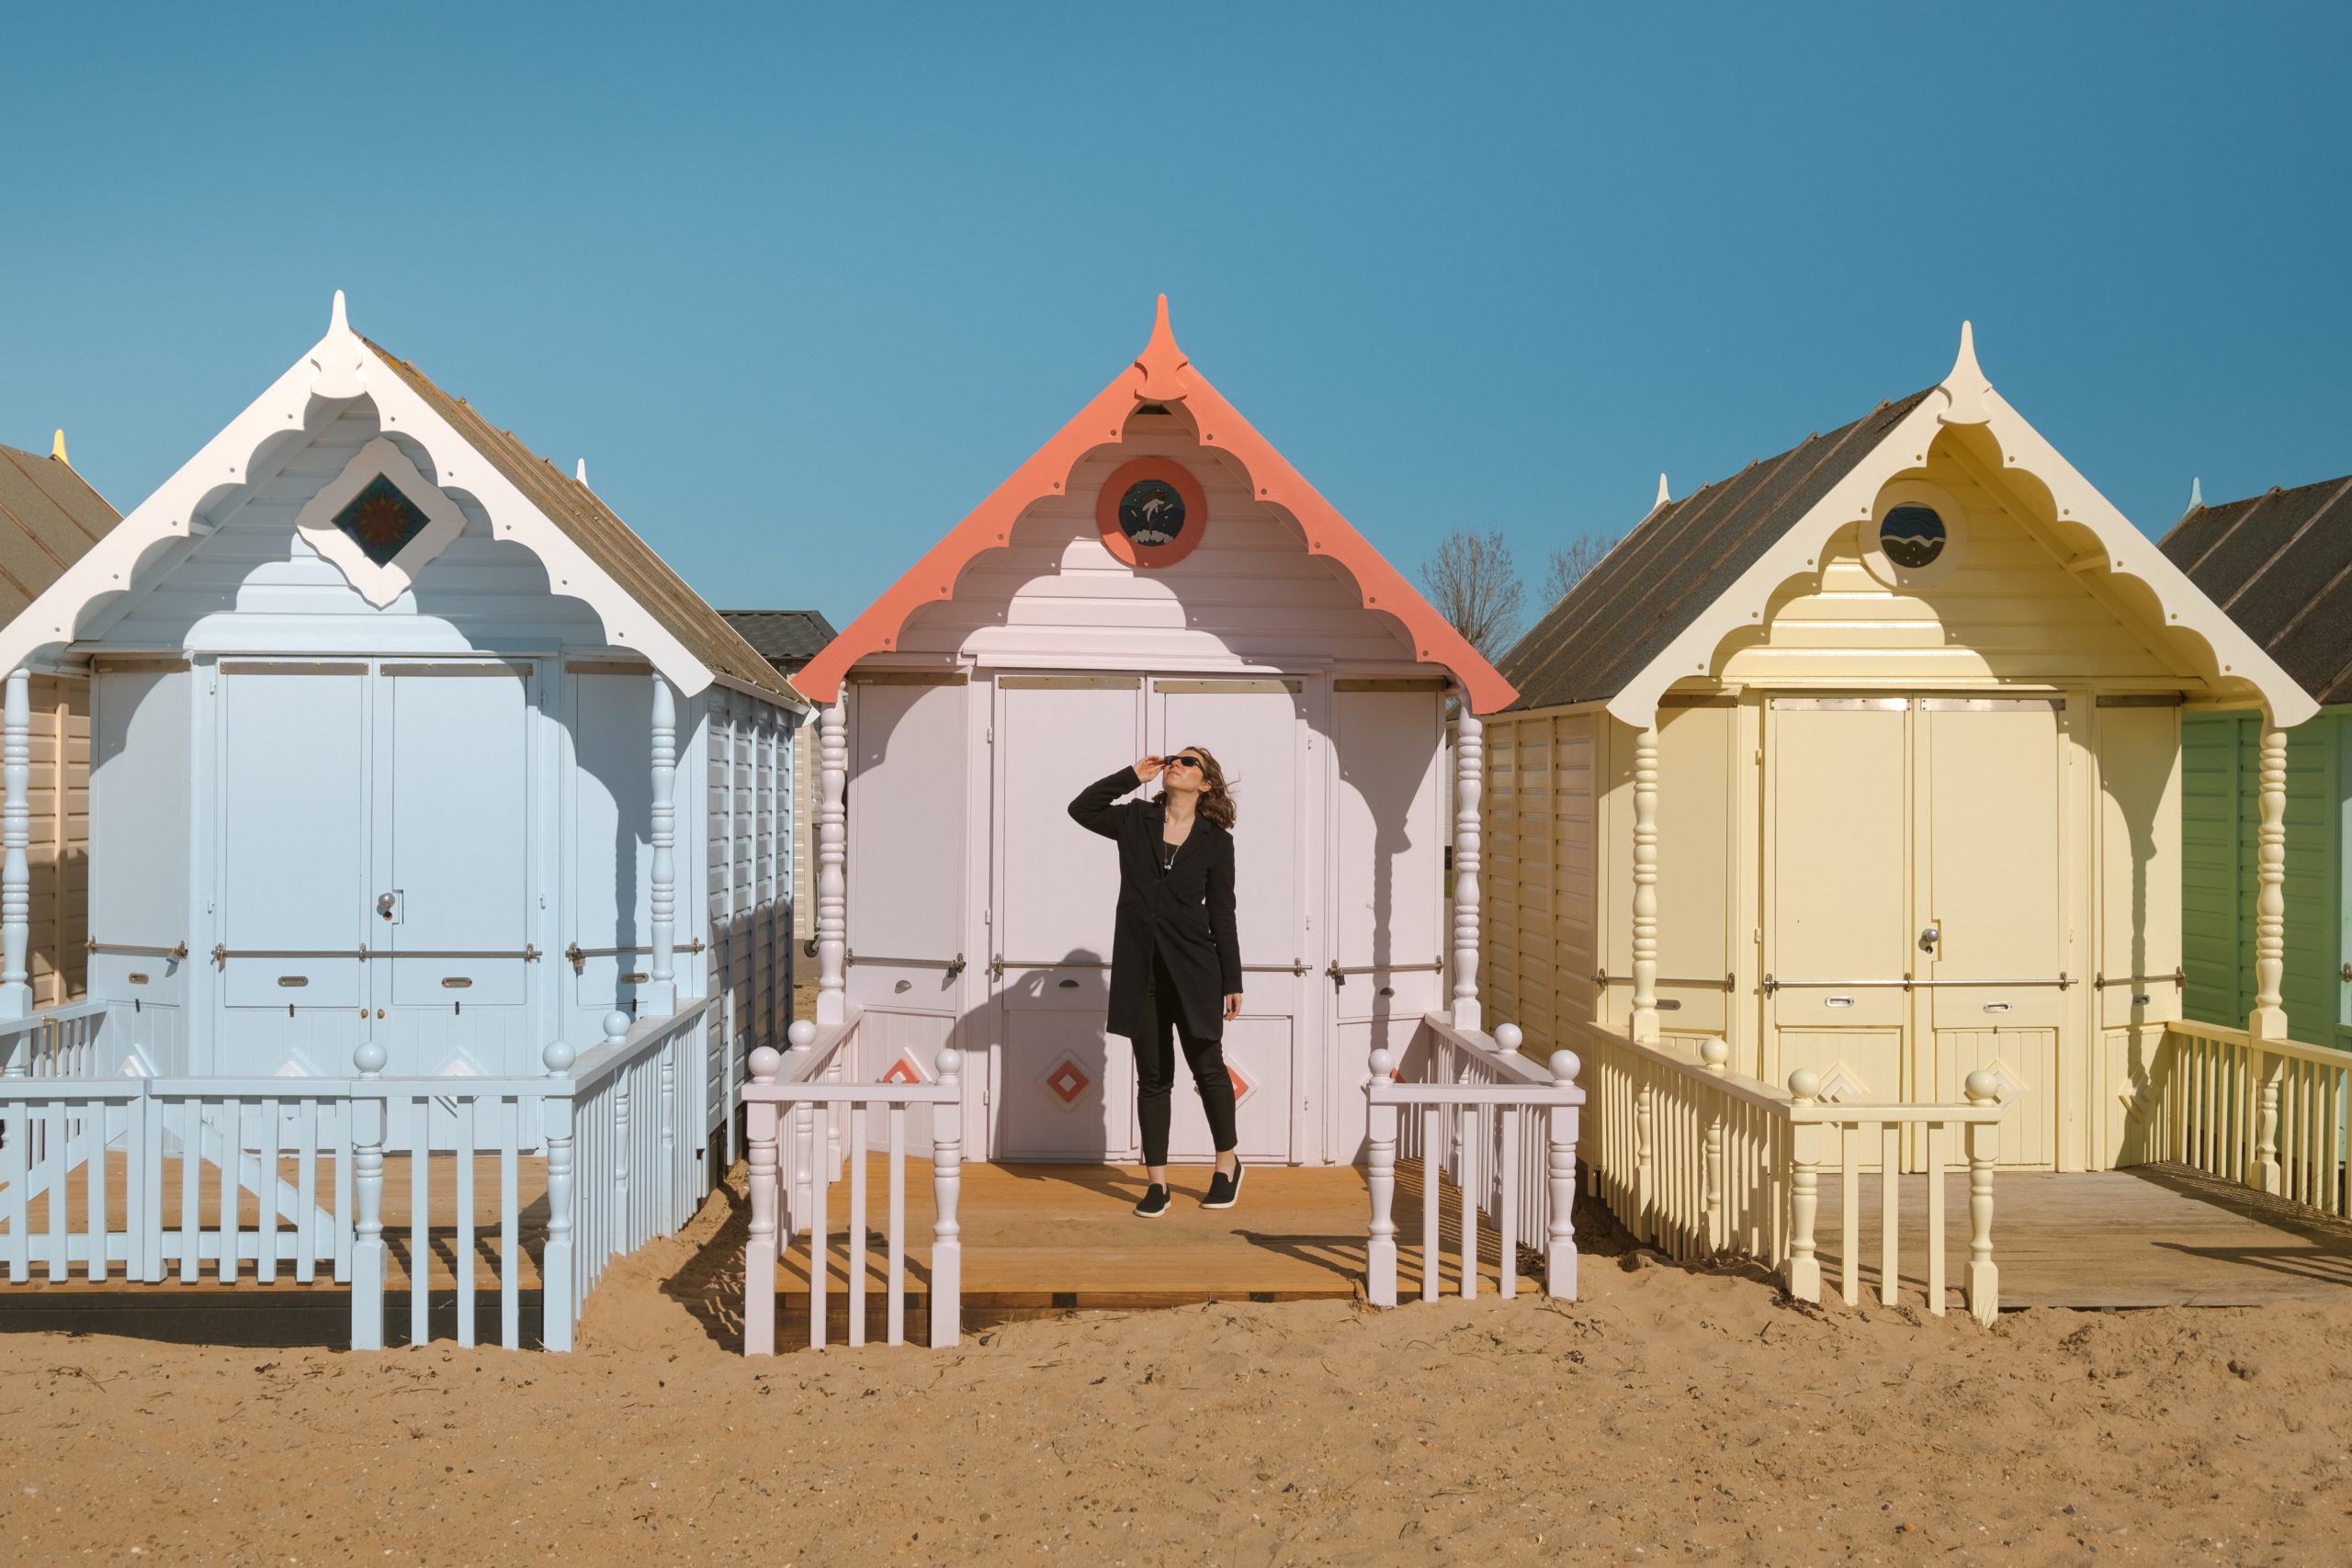 Mersea island with its colourful huts